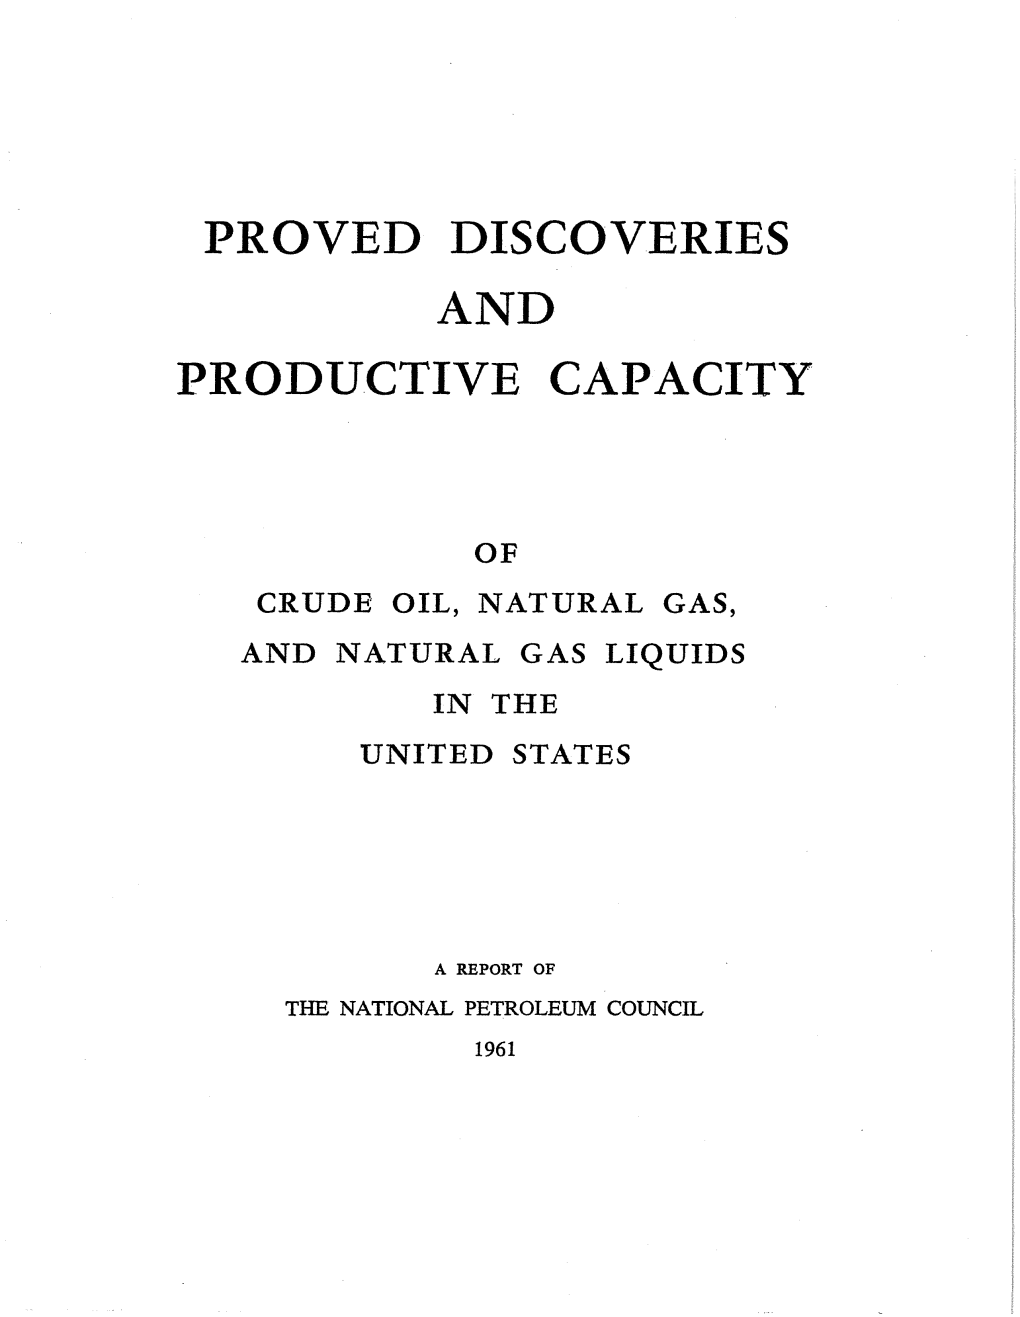 Proved Discoveries and Productive Capacity